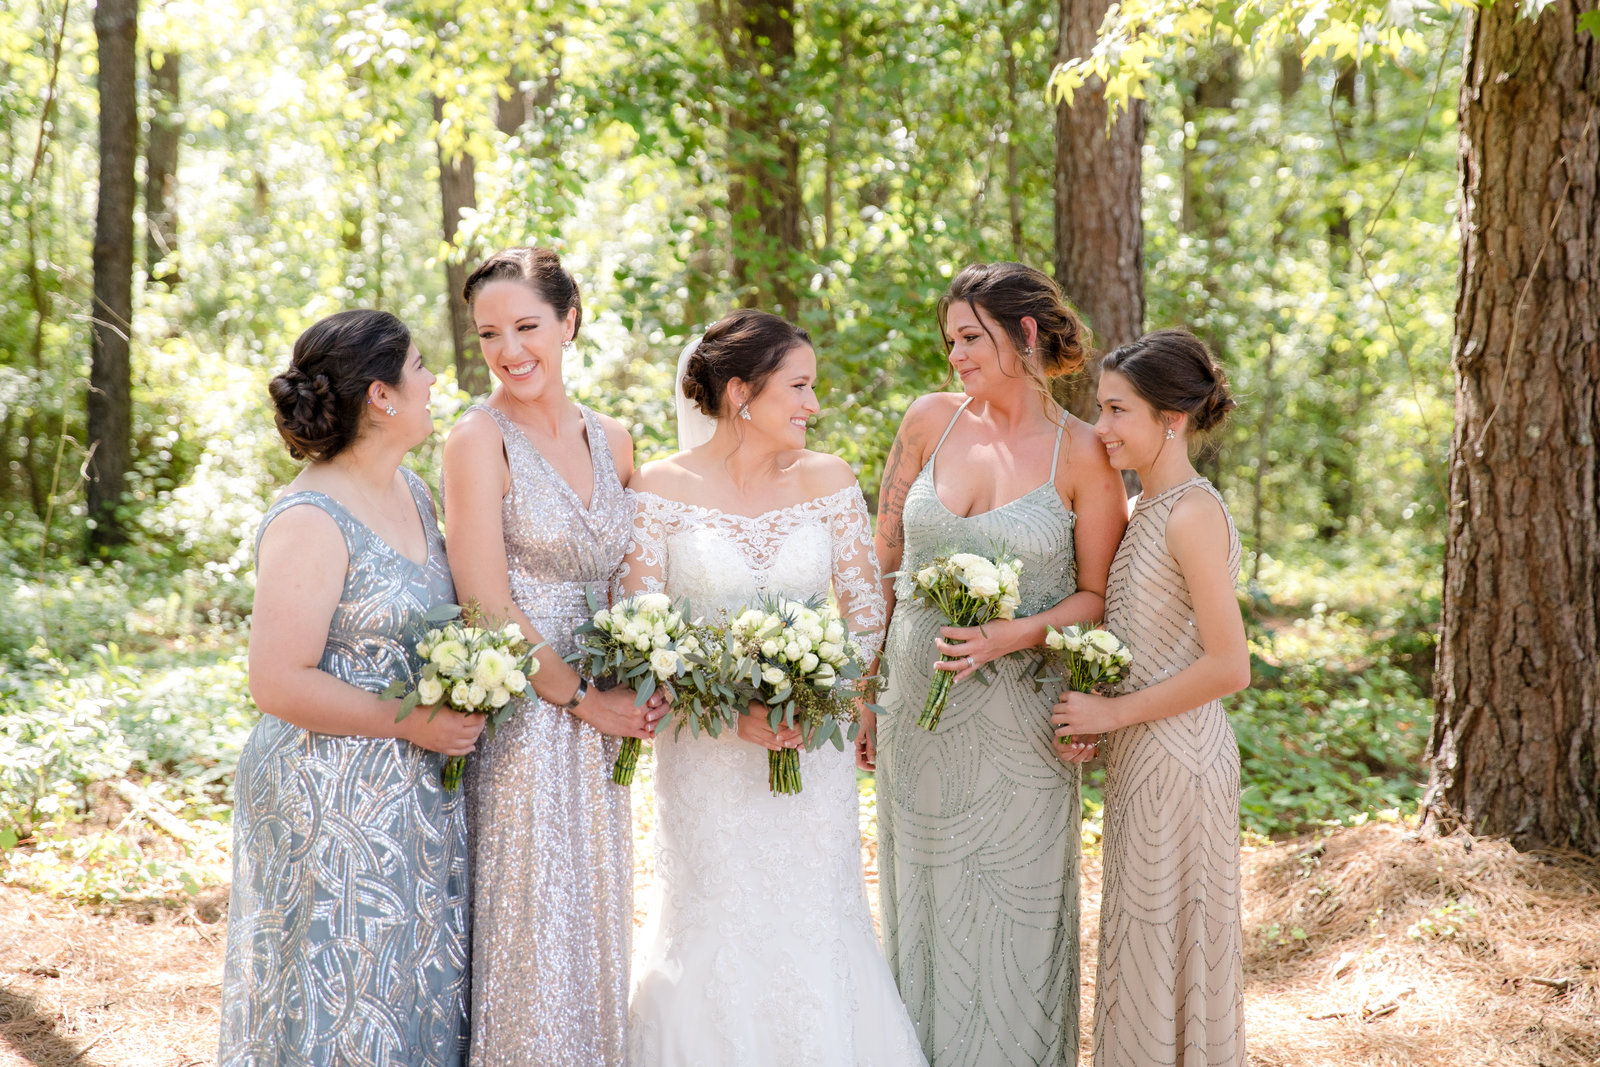 Photography by Tiffany - Fayetteville NC Wedding and Family Photographer - Apex  - Southern Pines - Pinehurst - Painted Pony Wedding - June 15, 2019 - 3